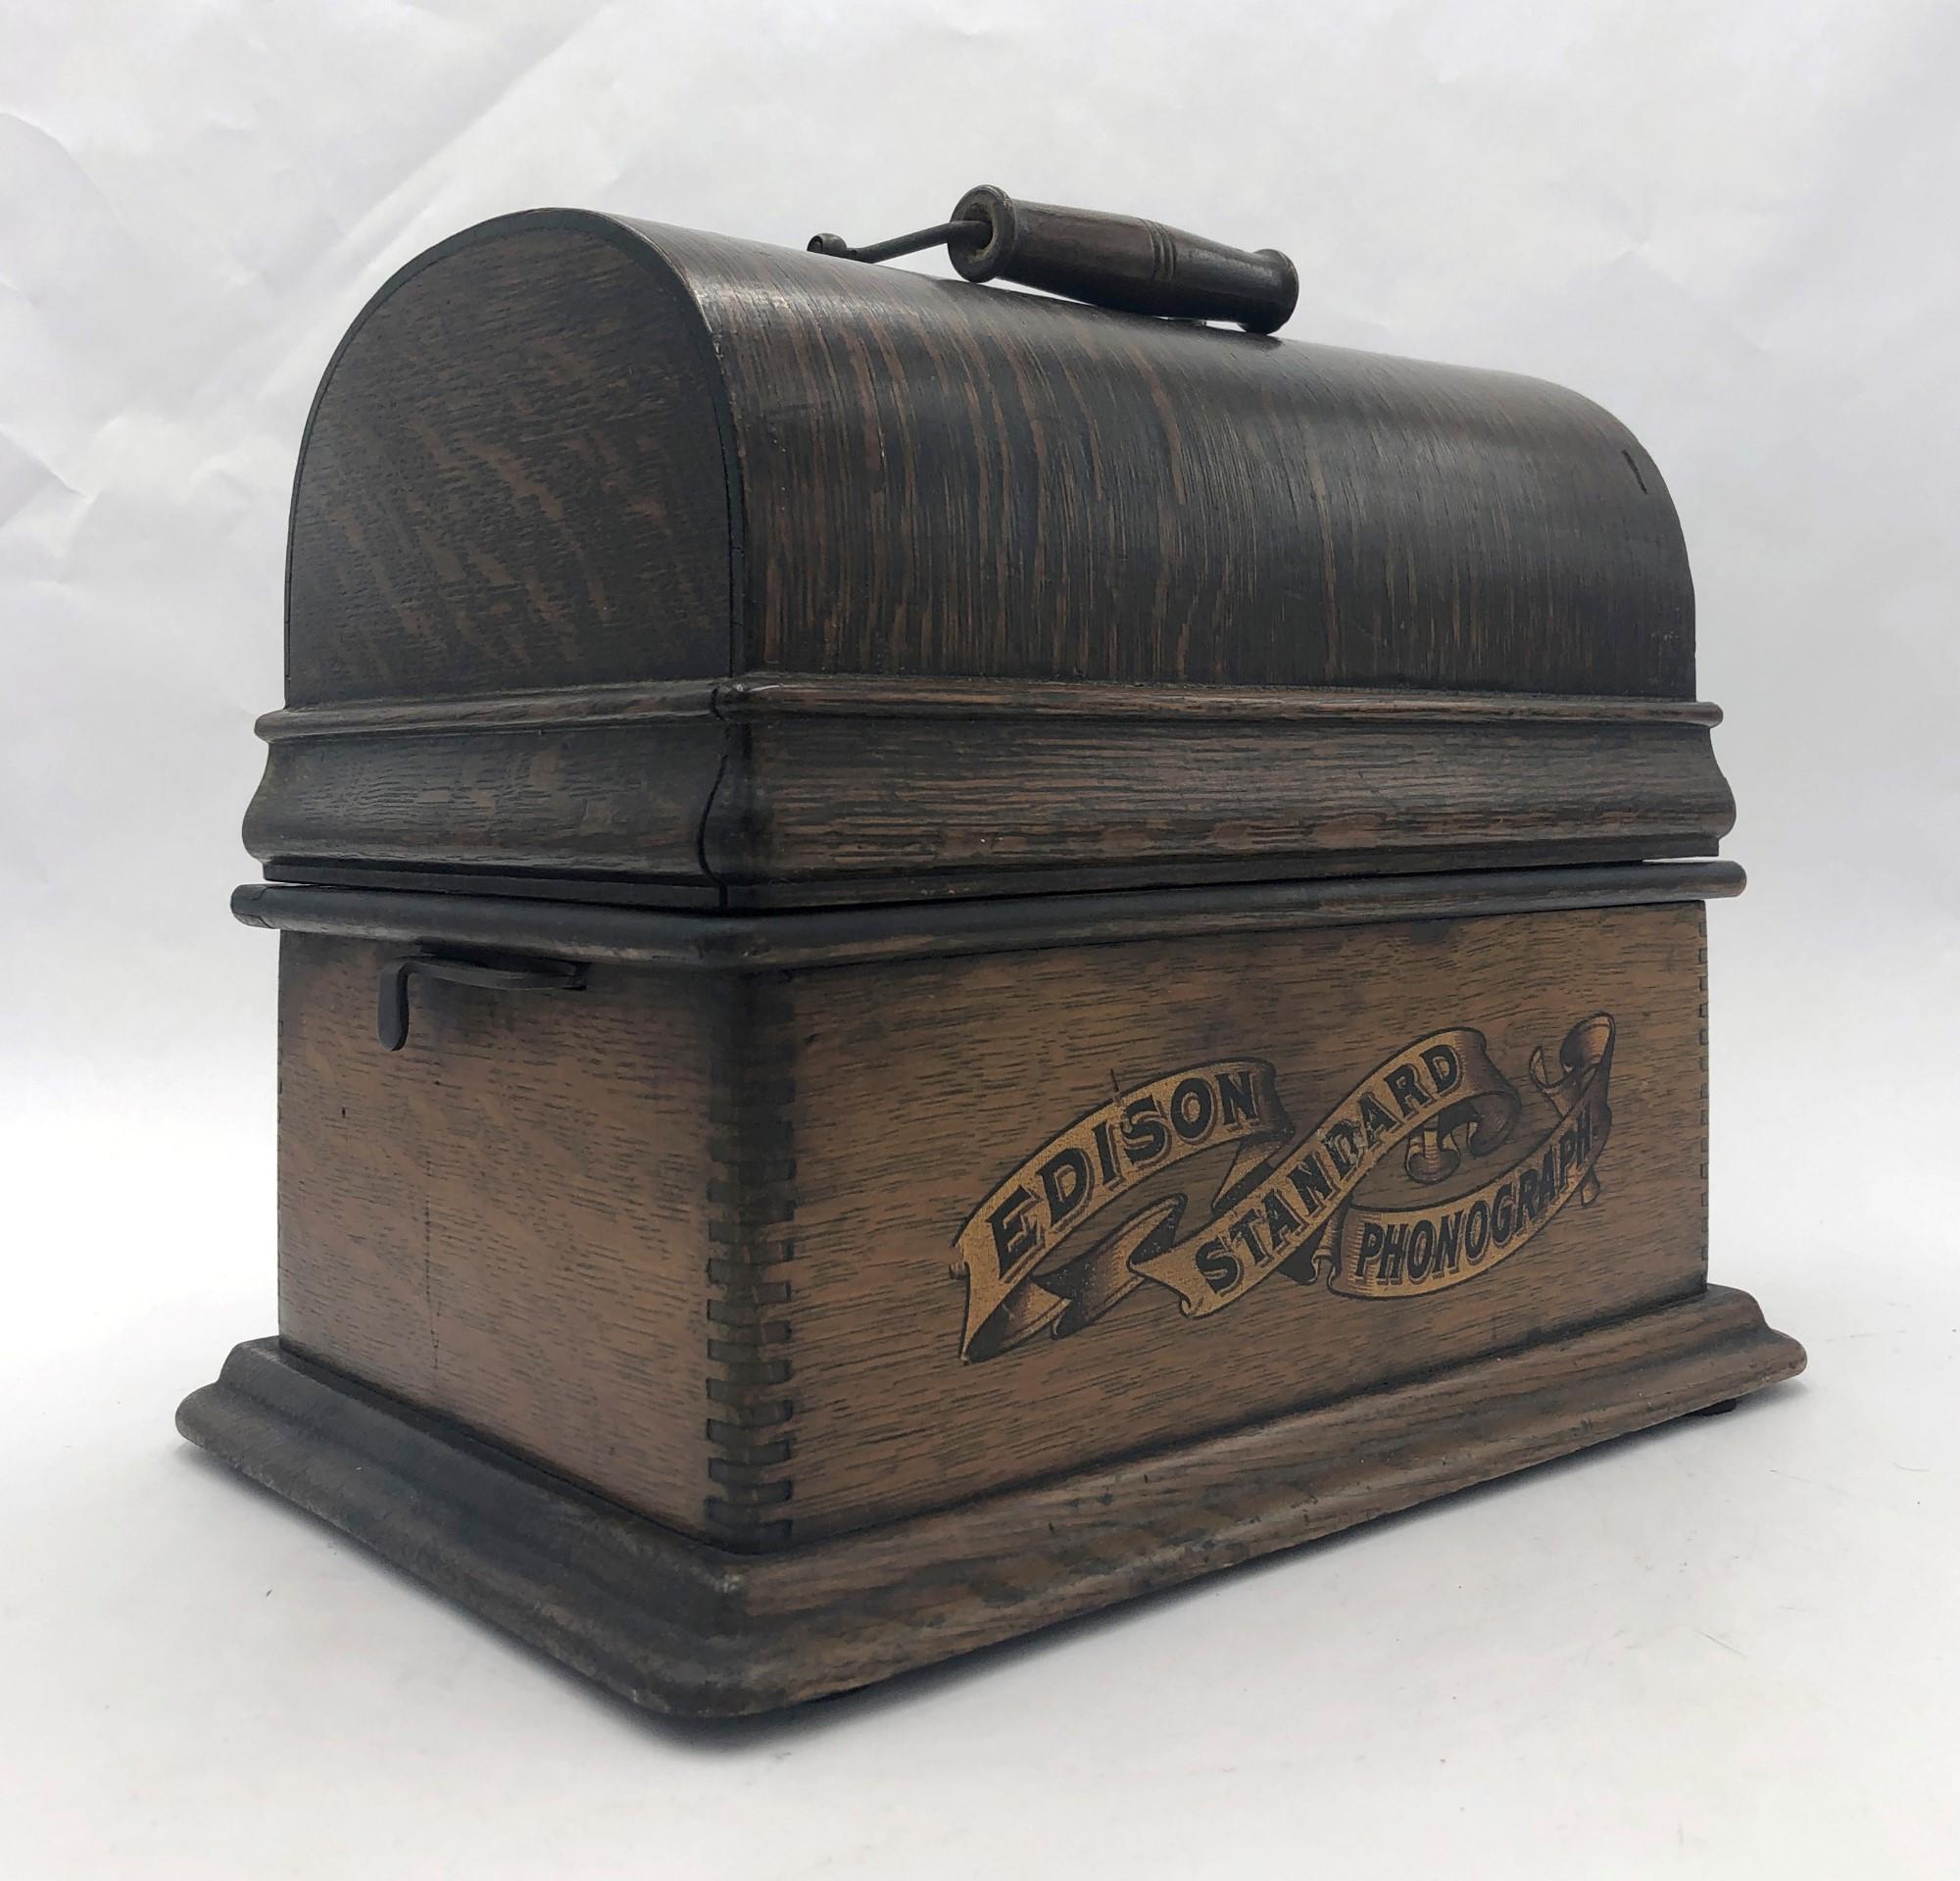 Refurbished working 1903 Edison cylinder phonograph. Features the original oak case. Comes complete with manual wind up crank and horn. This can be seen at our 333 West 52nd St location in the Theater District West of Manhattan.